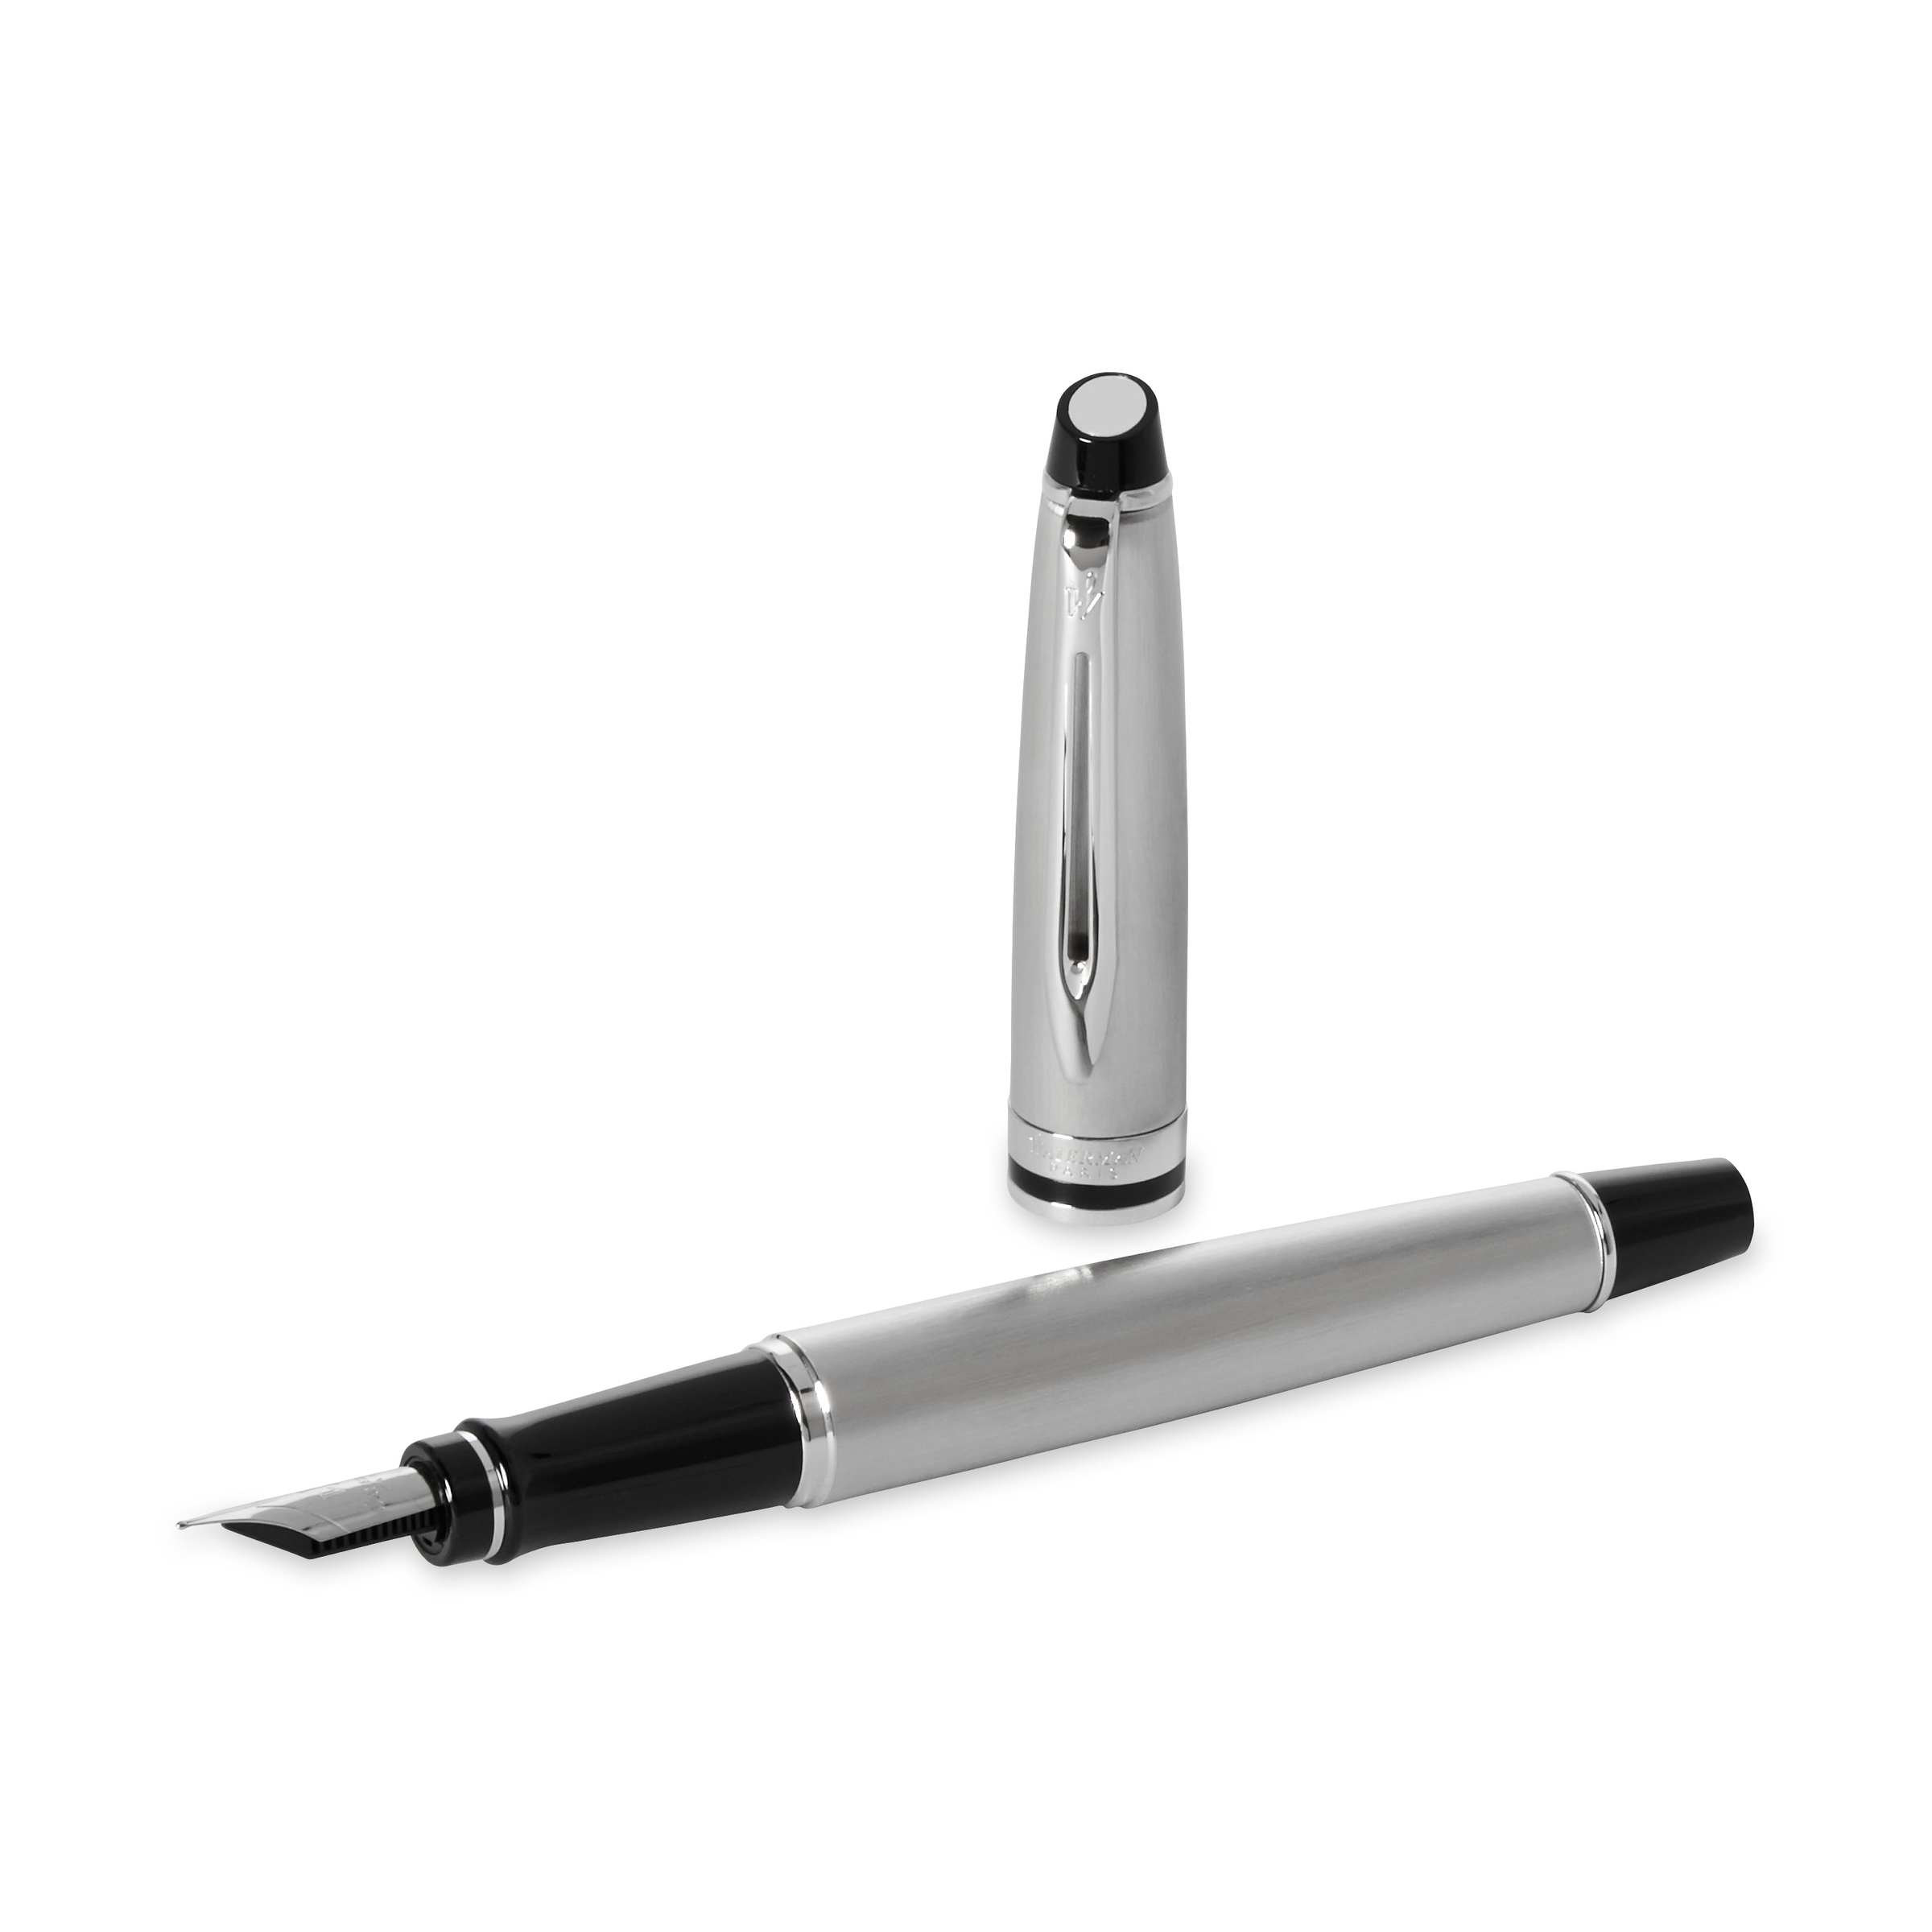 Waterman Expert Stainless Steel Chrome Trim Fountain Pen - Pencraft the boutique